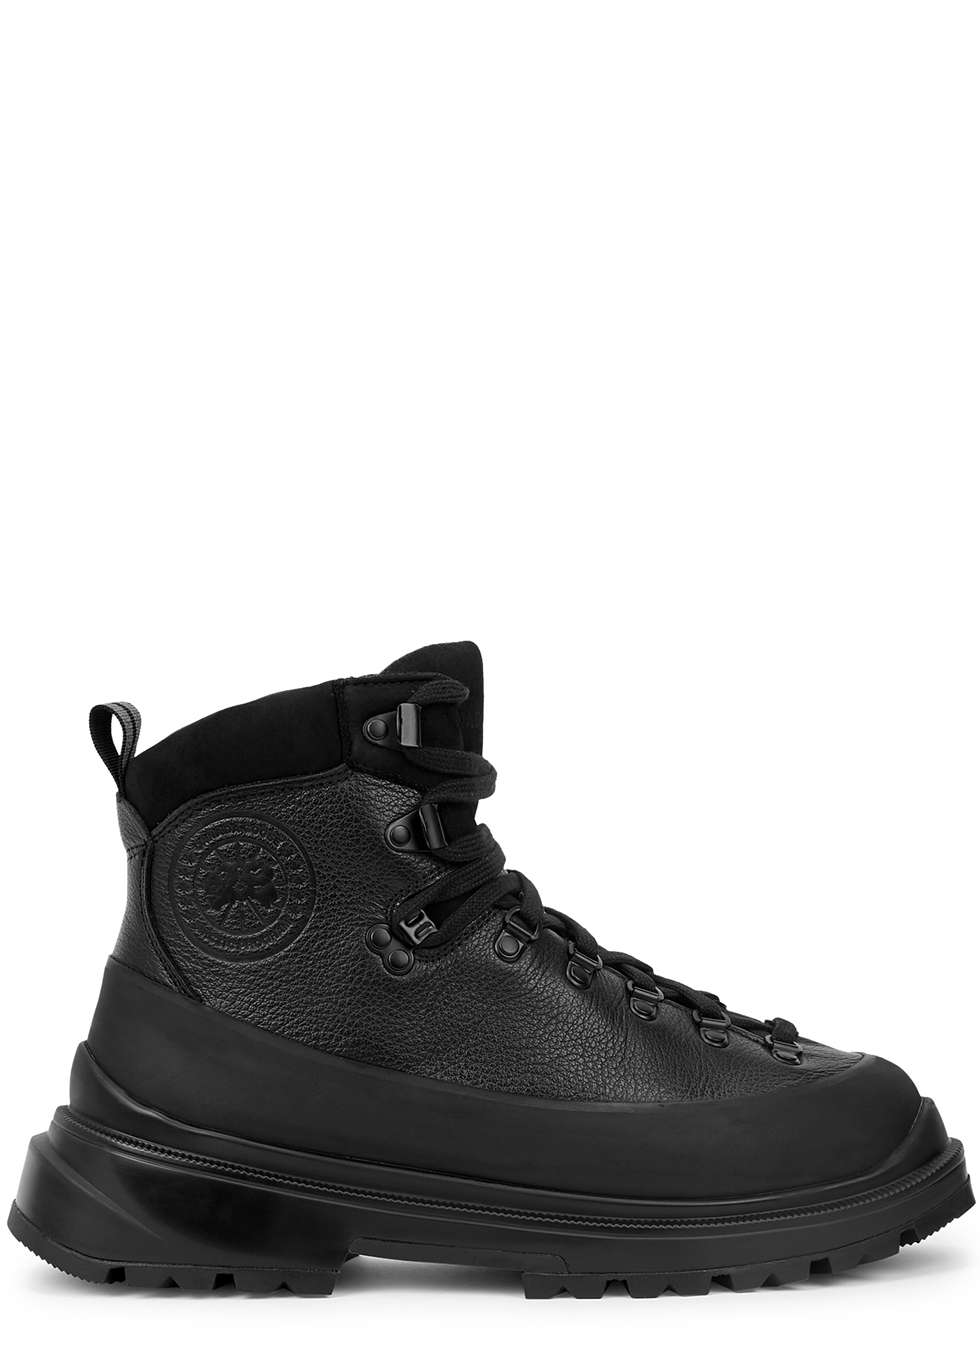 Canada Goose Journey black leather ankle boots